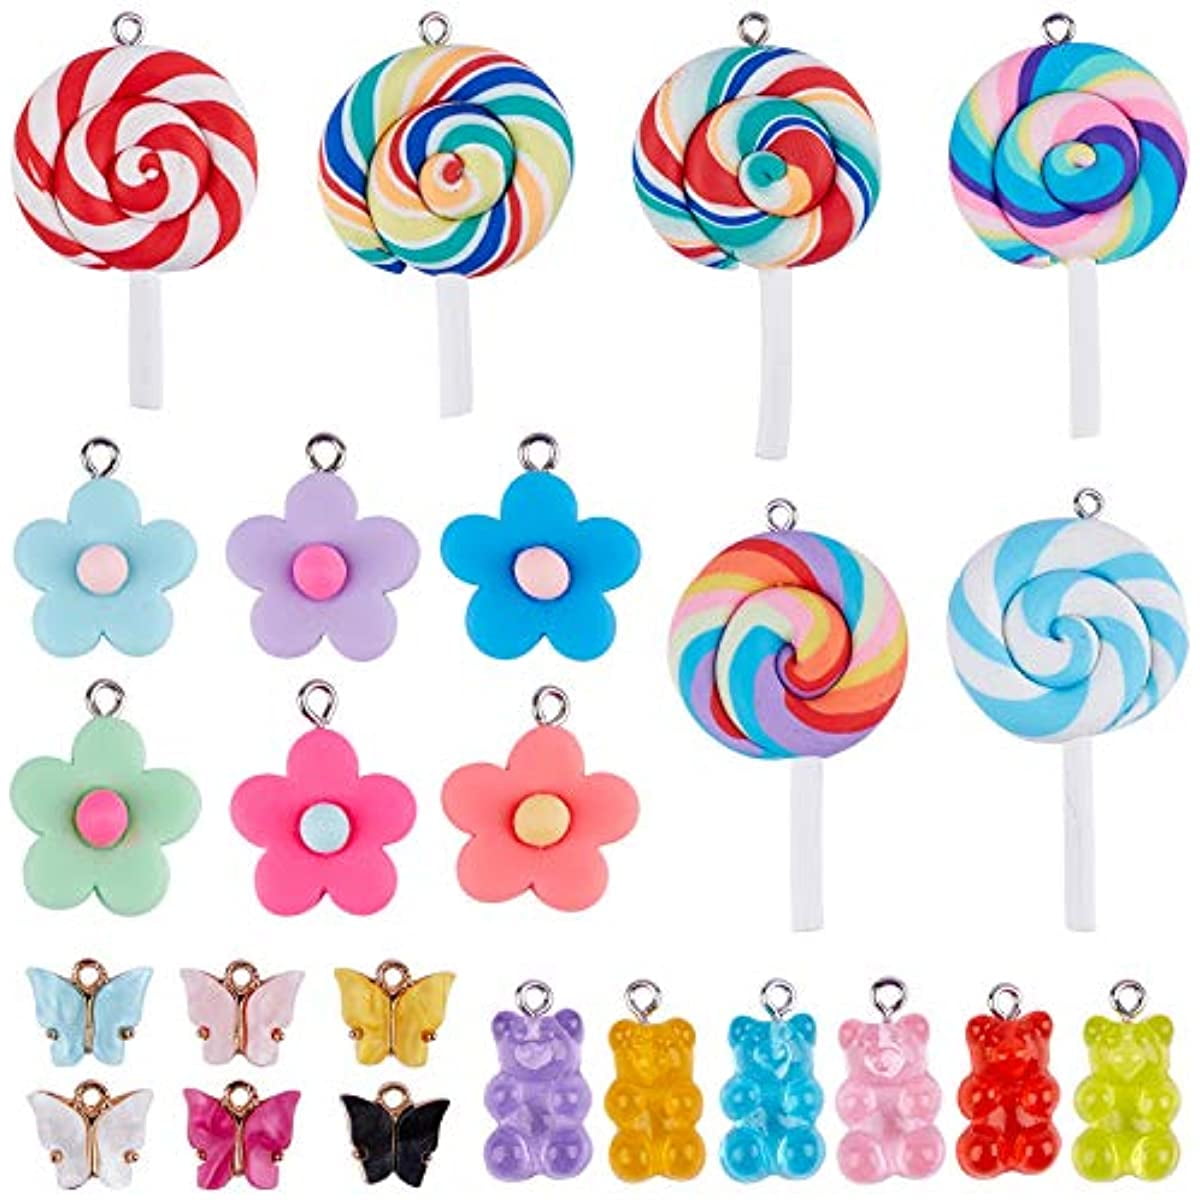 Hicarer 70 Pieces Colorful Candy Pendant Charm for Jewelry Making Cute  Gummy Candy Bear Lollipops Pendant Charms Polymer Clay Resin Charms for DIY  Keychain Necklace Bracelet Earring Craft